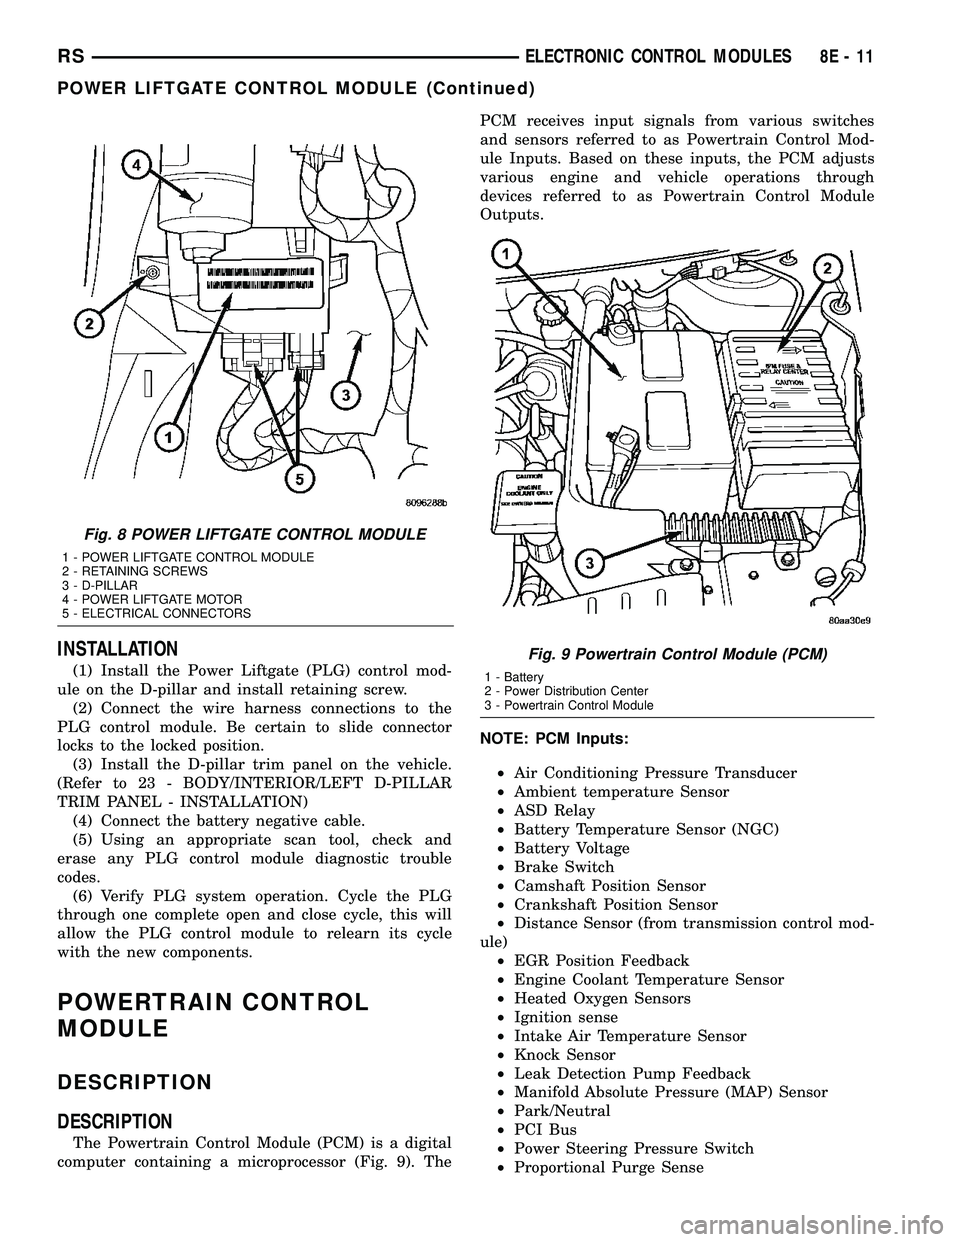 CHRYSLER VOYAGER 2005 Owners Guide INSTALLATION
(1) Install the Power Liftgate (PLG) control mod-
ule on the D-pillar and install retaining screw.
(2) Connect the wire harness connections to the
PLG control module. Be certain to slide 